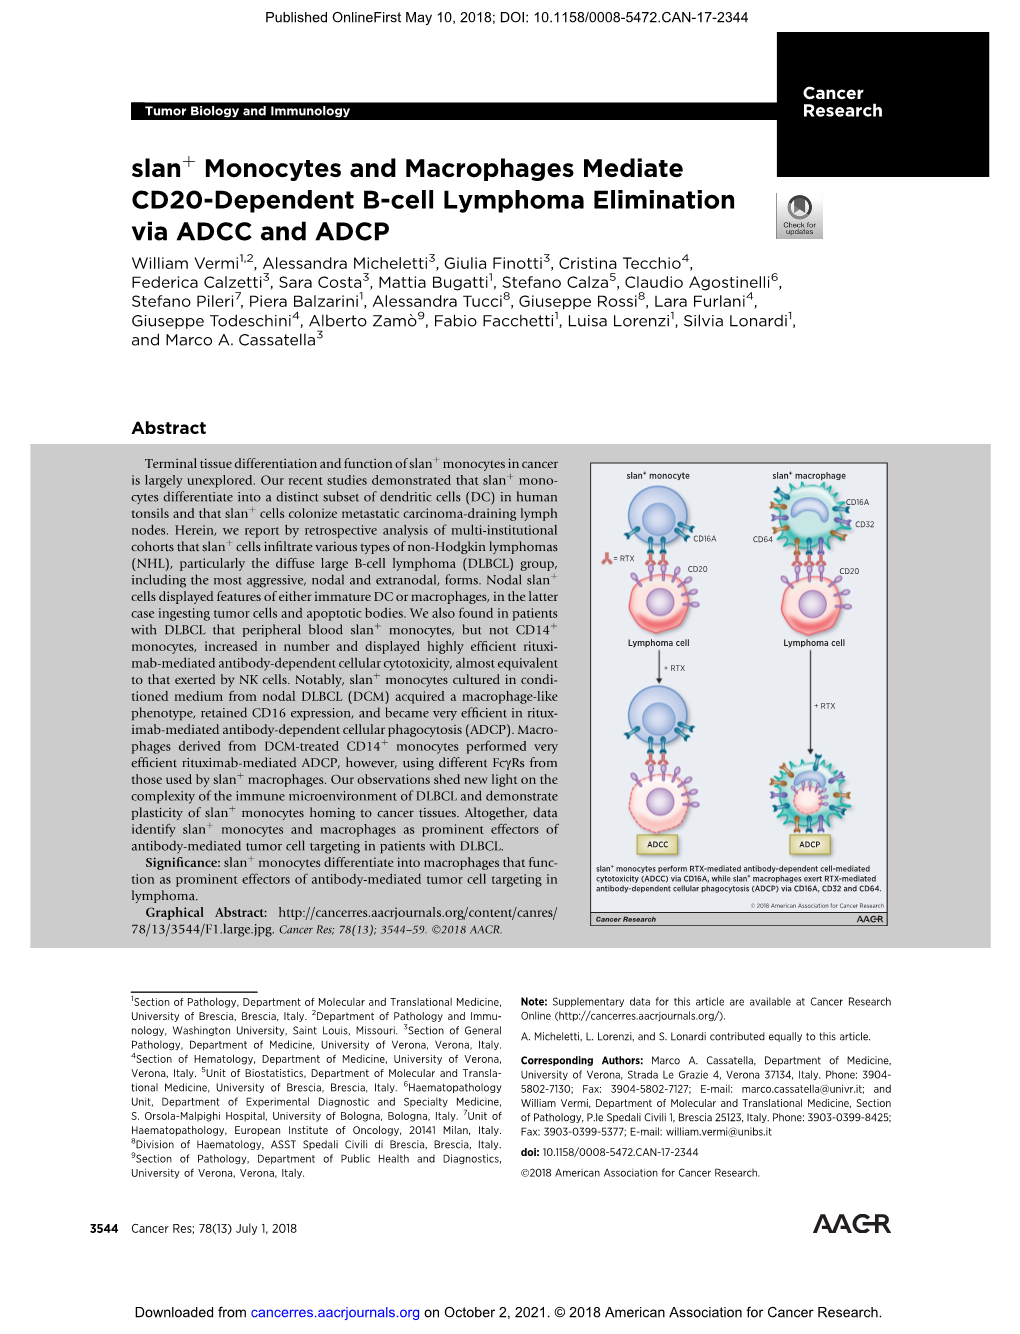 Slan Monocytes and Macrophages Mediate CD20-Dependent B-Cell